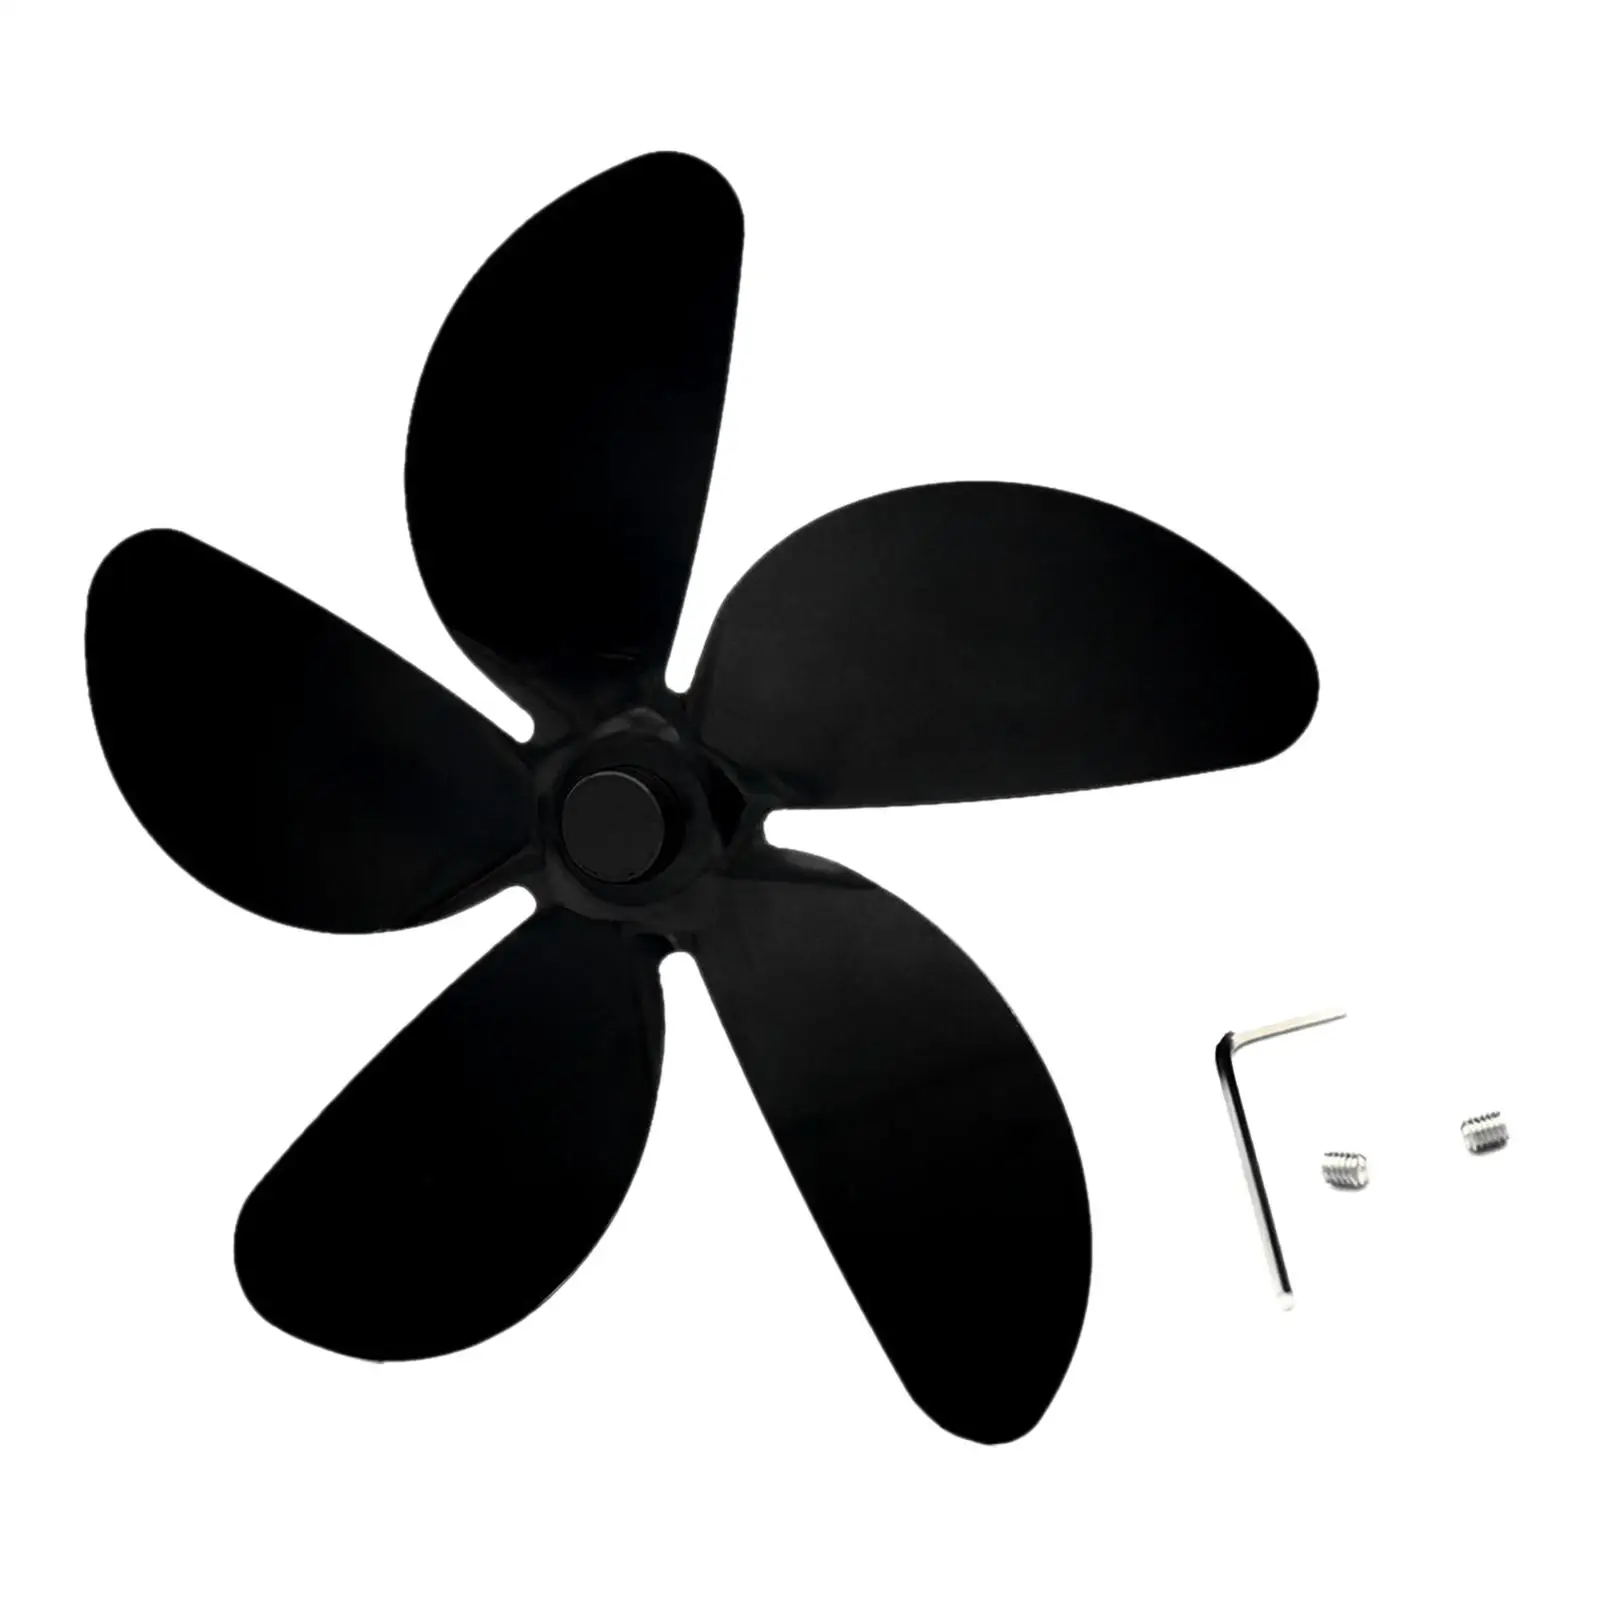 Stove Fan Blade Replacement Heat Powered Warm Fan Accessories Parts Quiet for Fireplace Distribution Indoor Warm Air